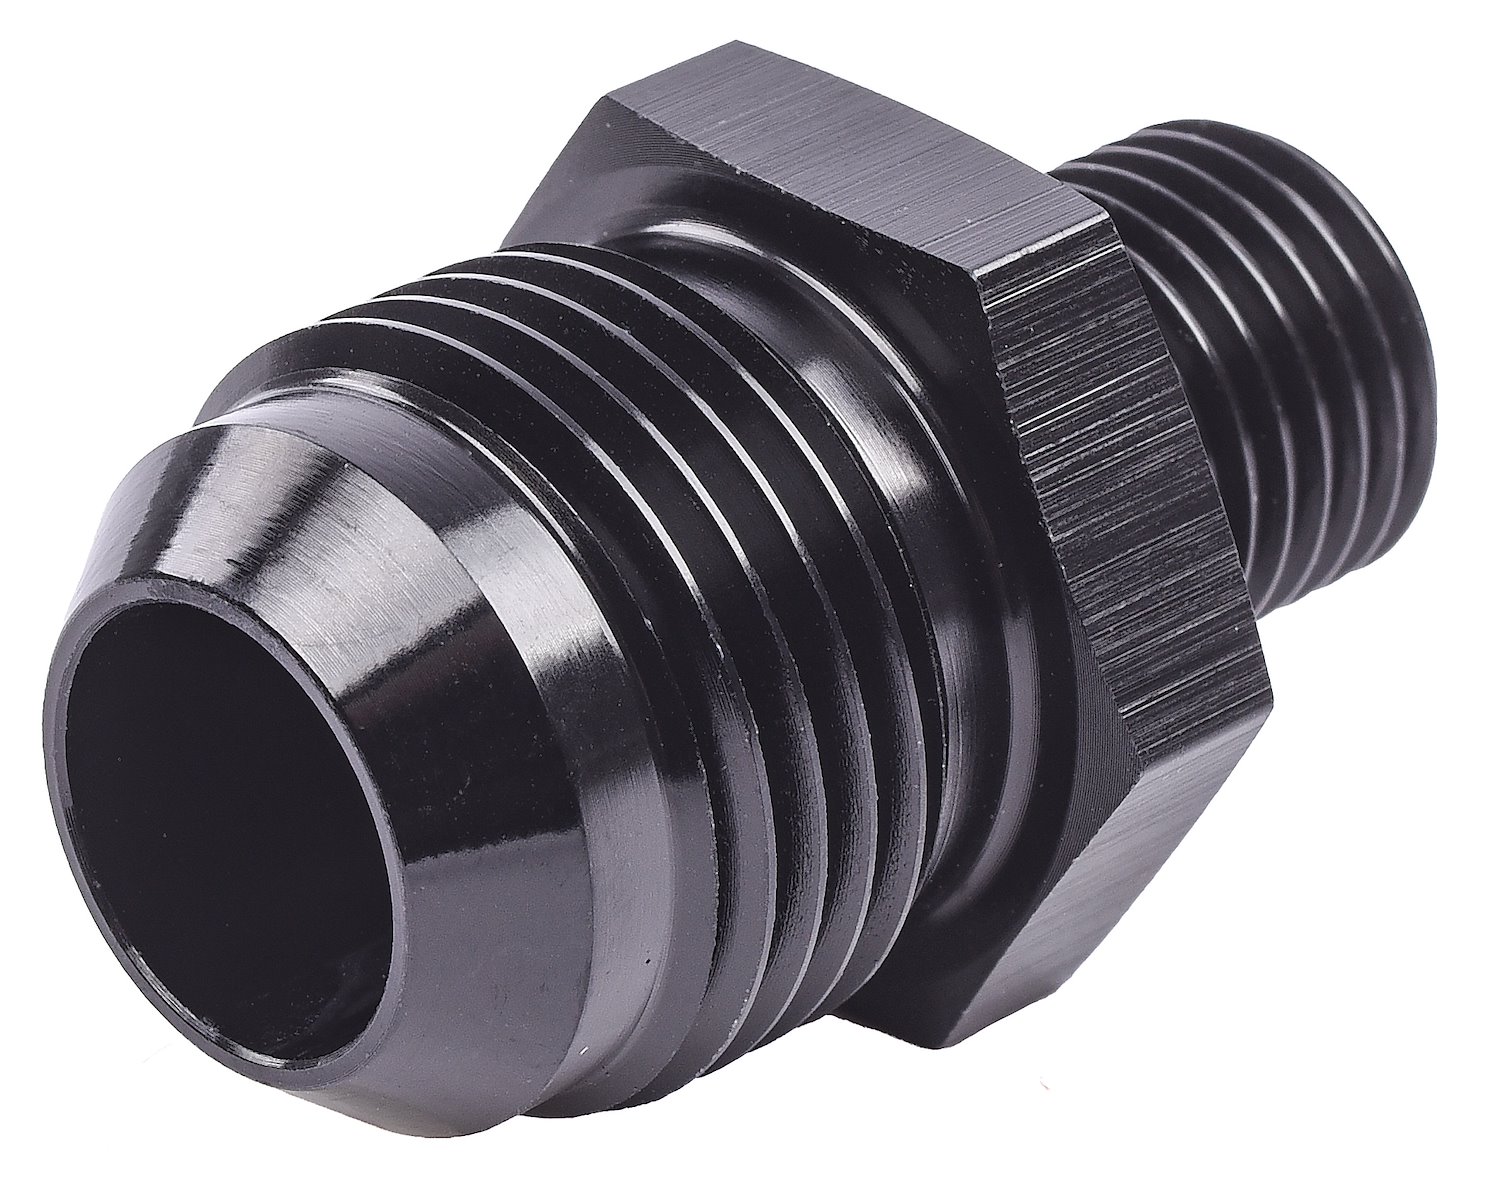 AN to Metric Adapter Fitting [-10 AN Male to 14mm x 1.5 Male]